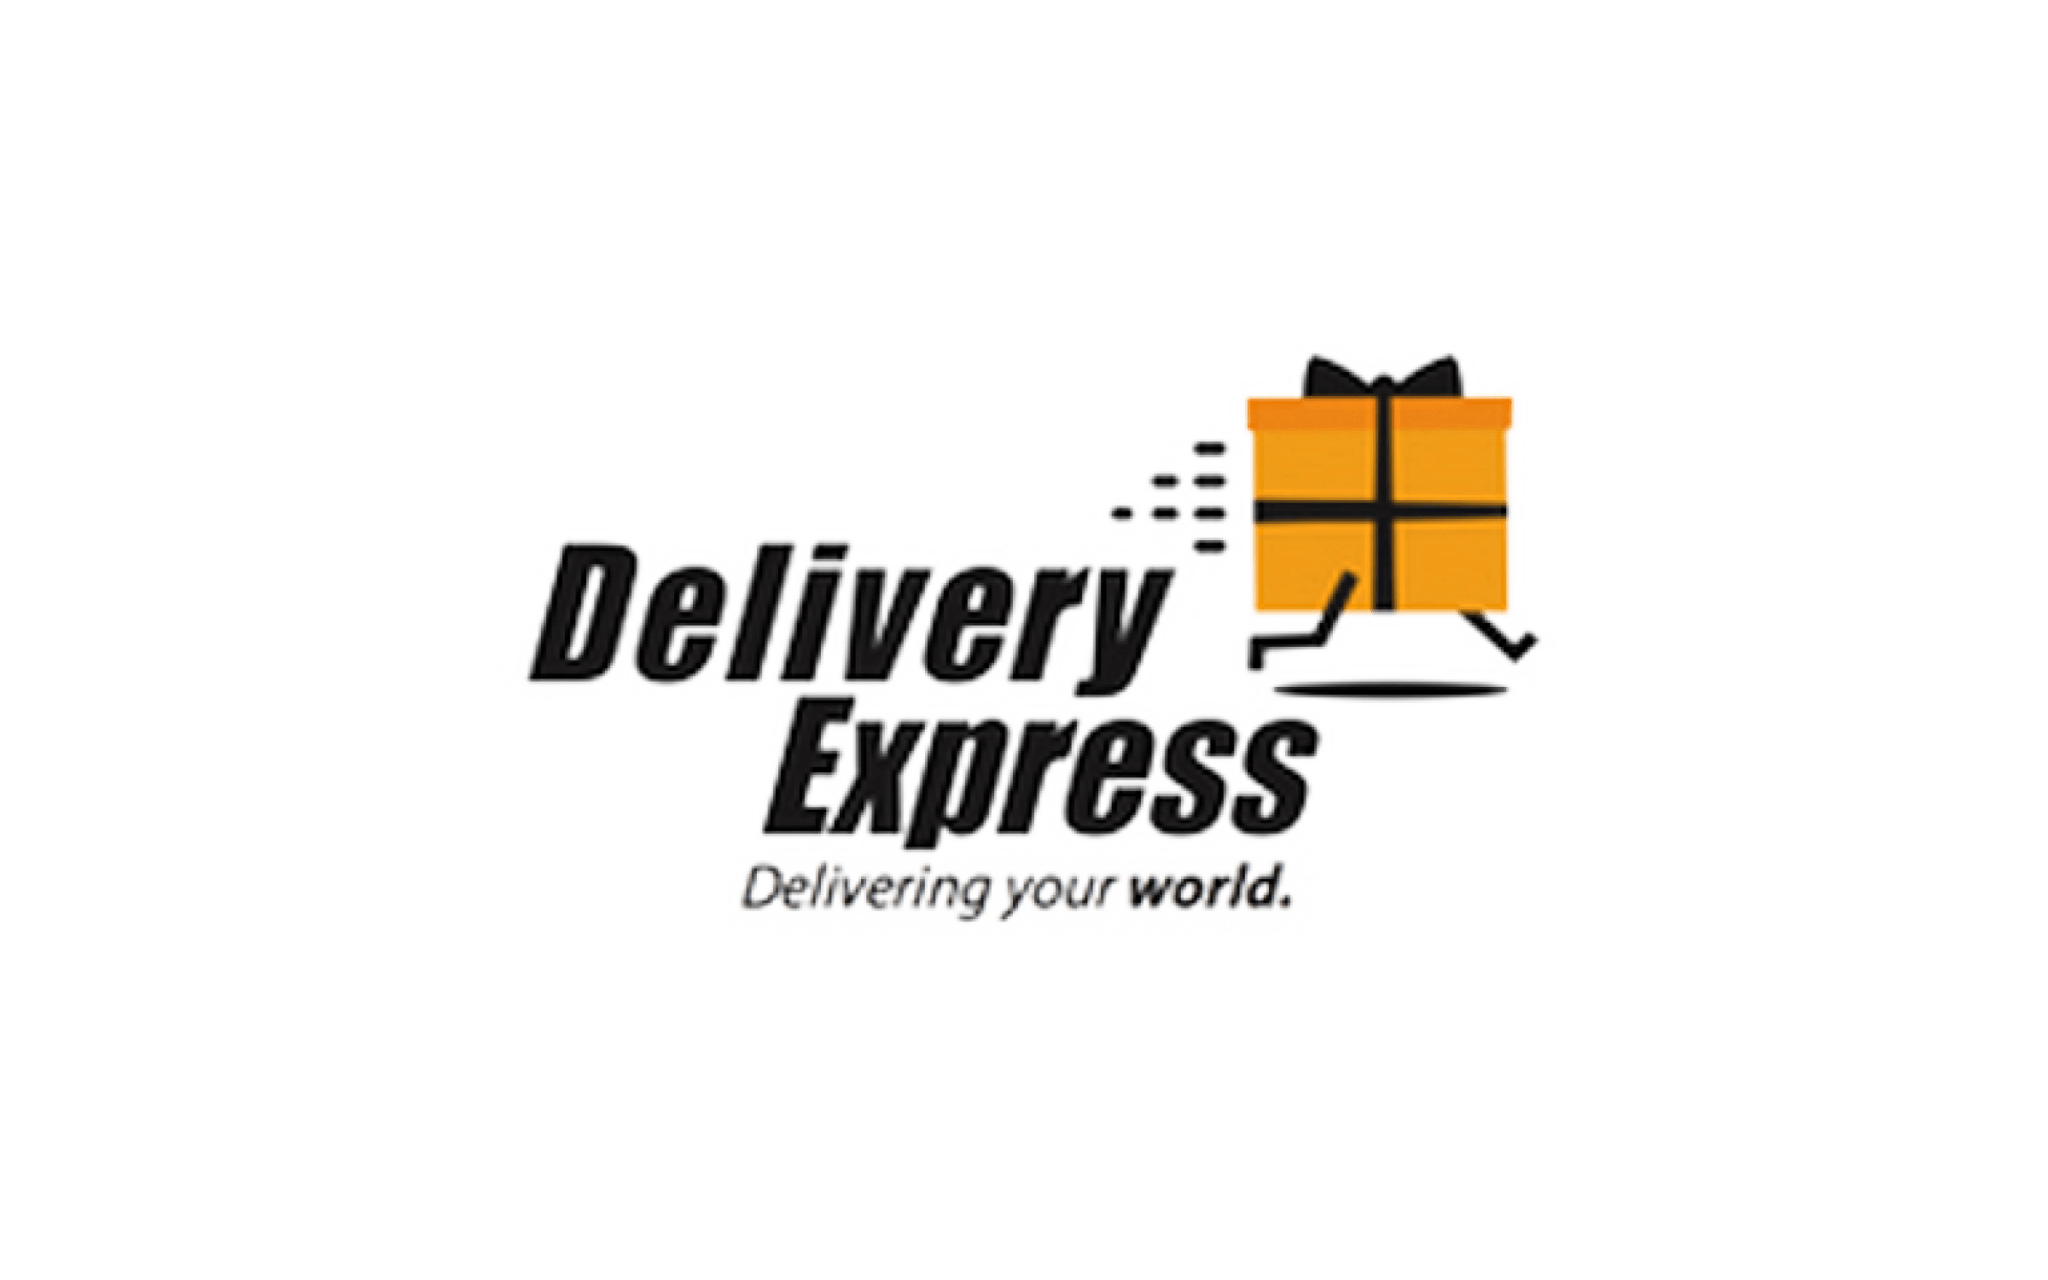 12.Delivery Express